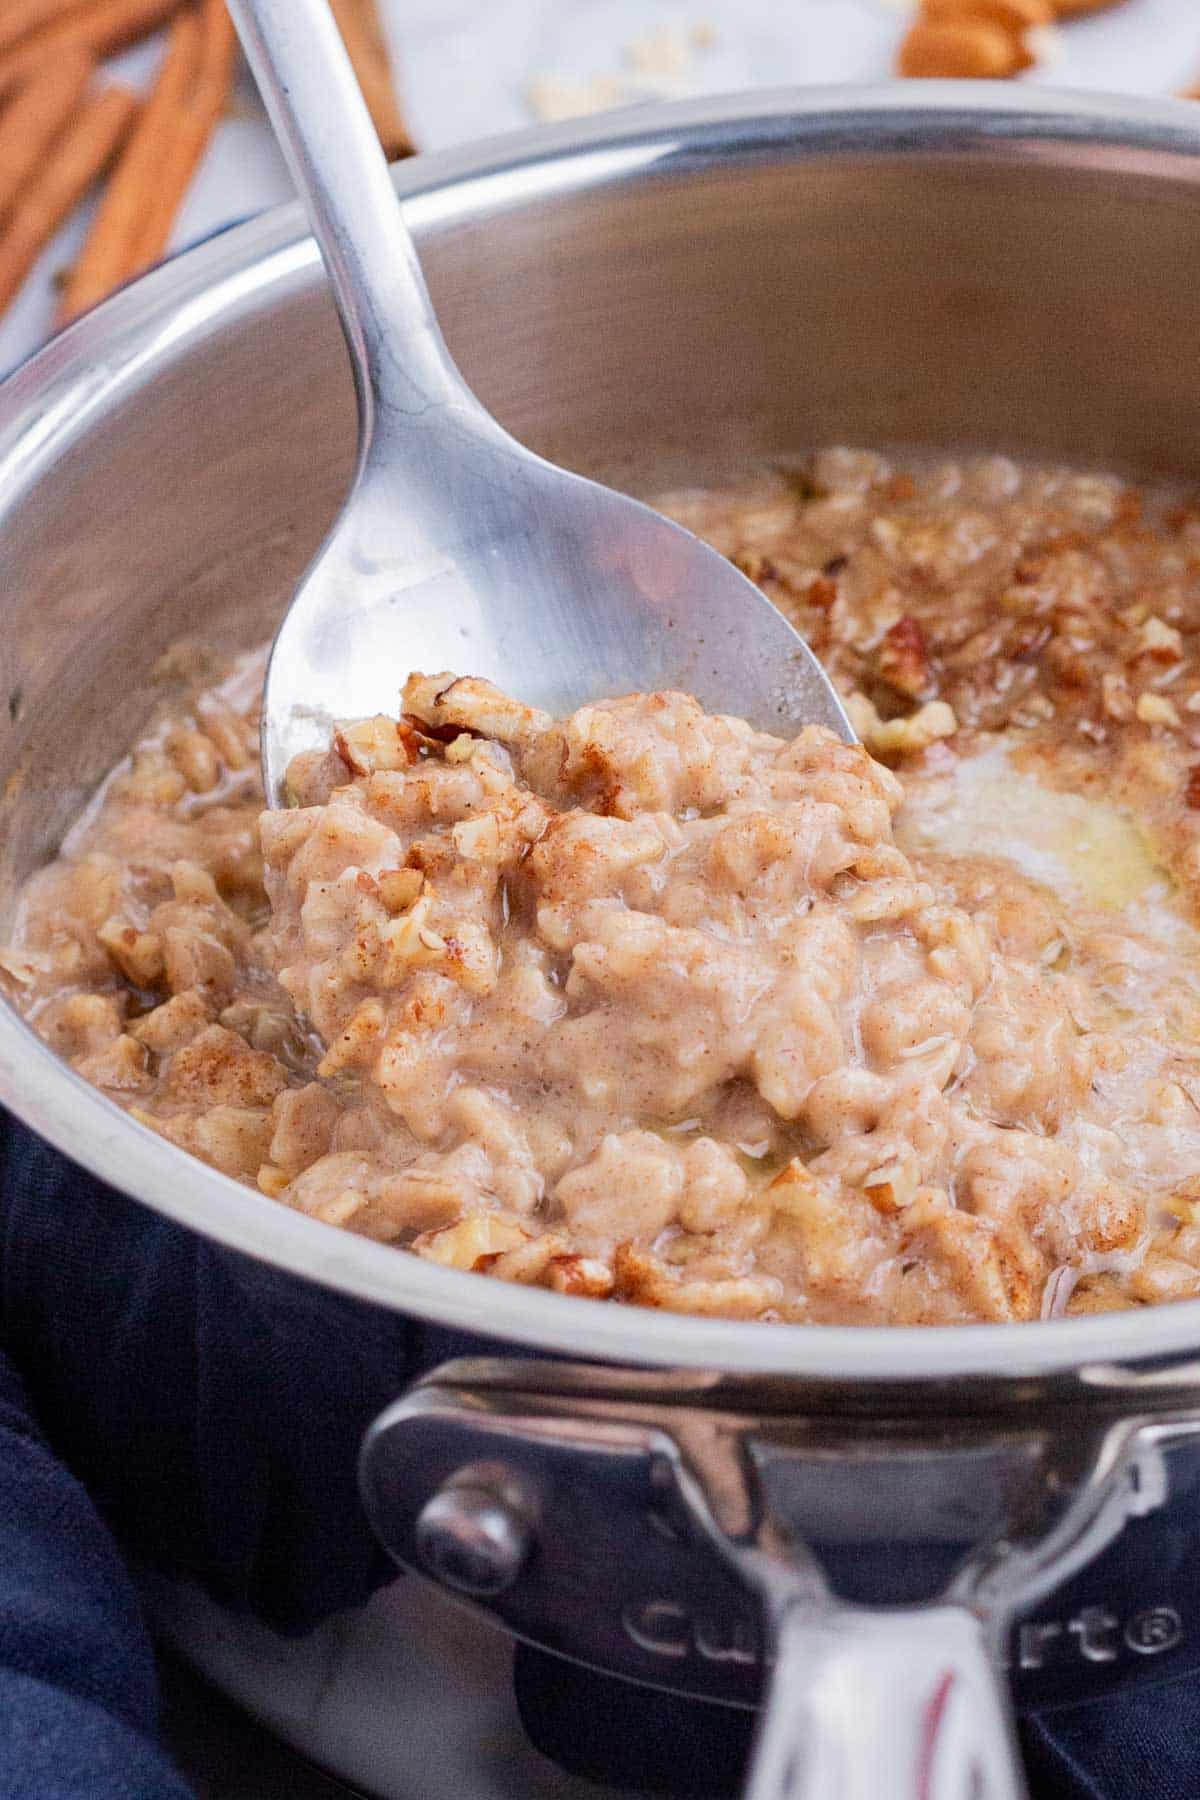 A metal spoon stirs oatmeal in a pot.